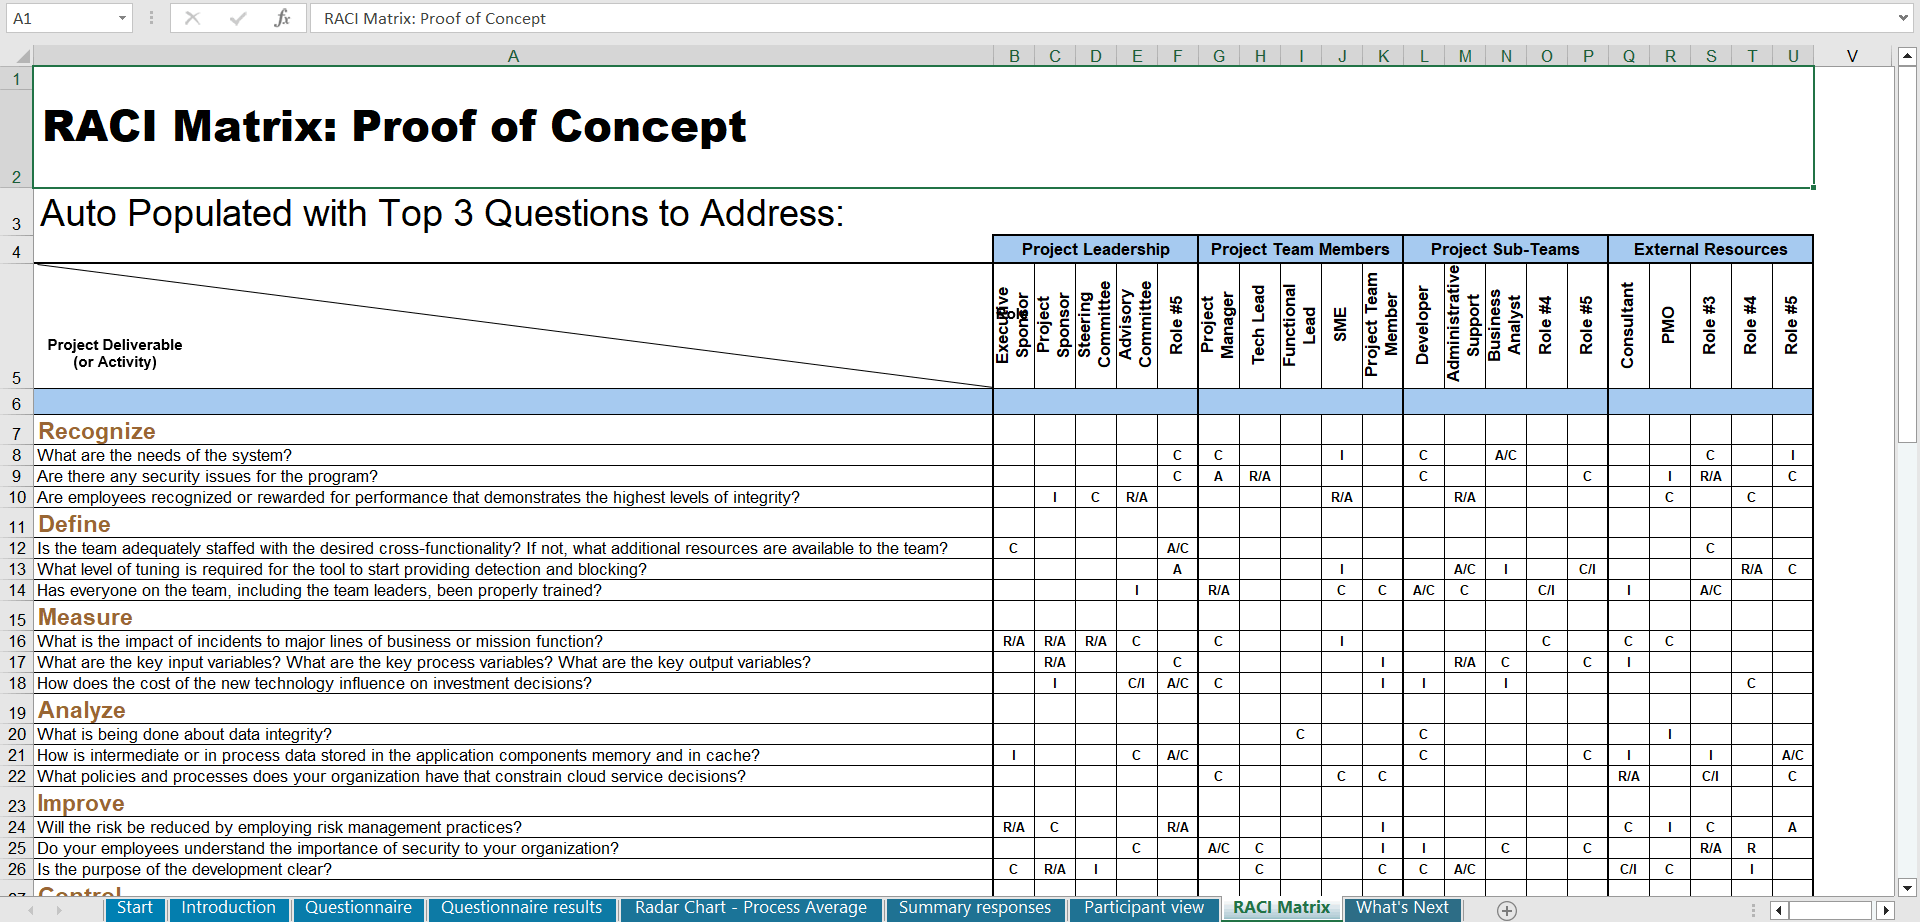 Proof of Concept (PoC) - Implementation Toolkit (Excel template (XLSX)) Preview Image